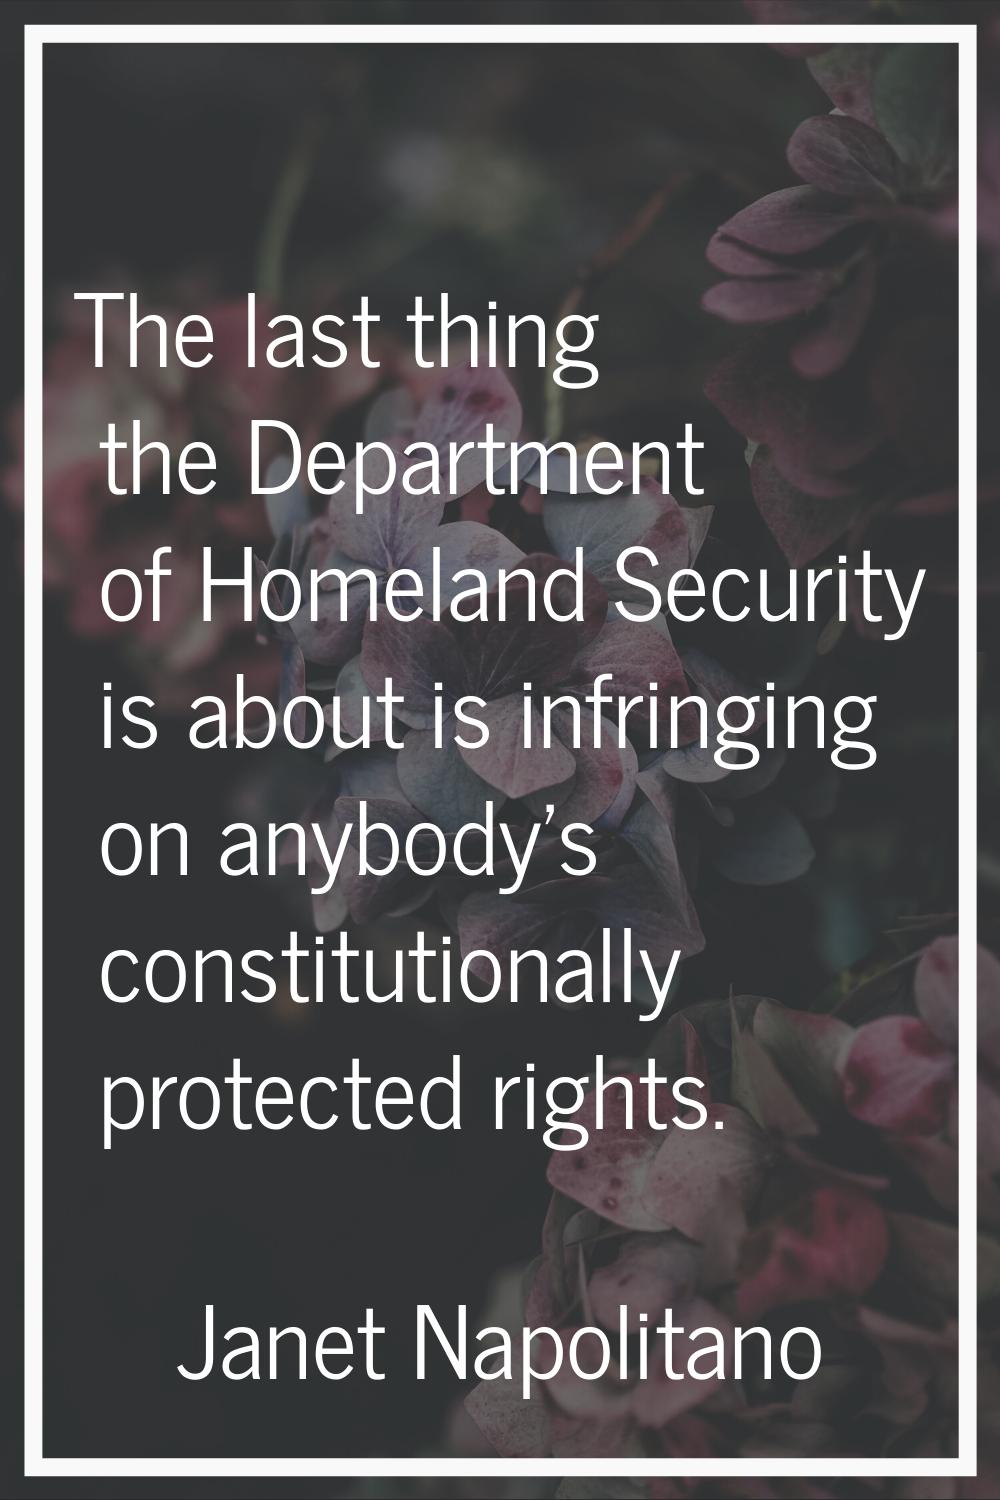 The last thing the Department of Homeland Security is about is infringing on anybody's constitution